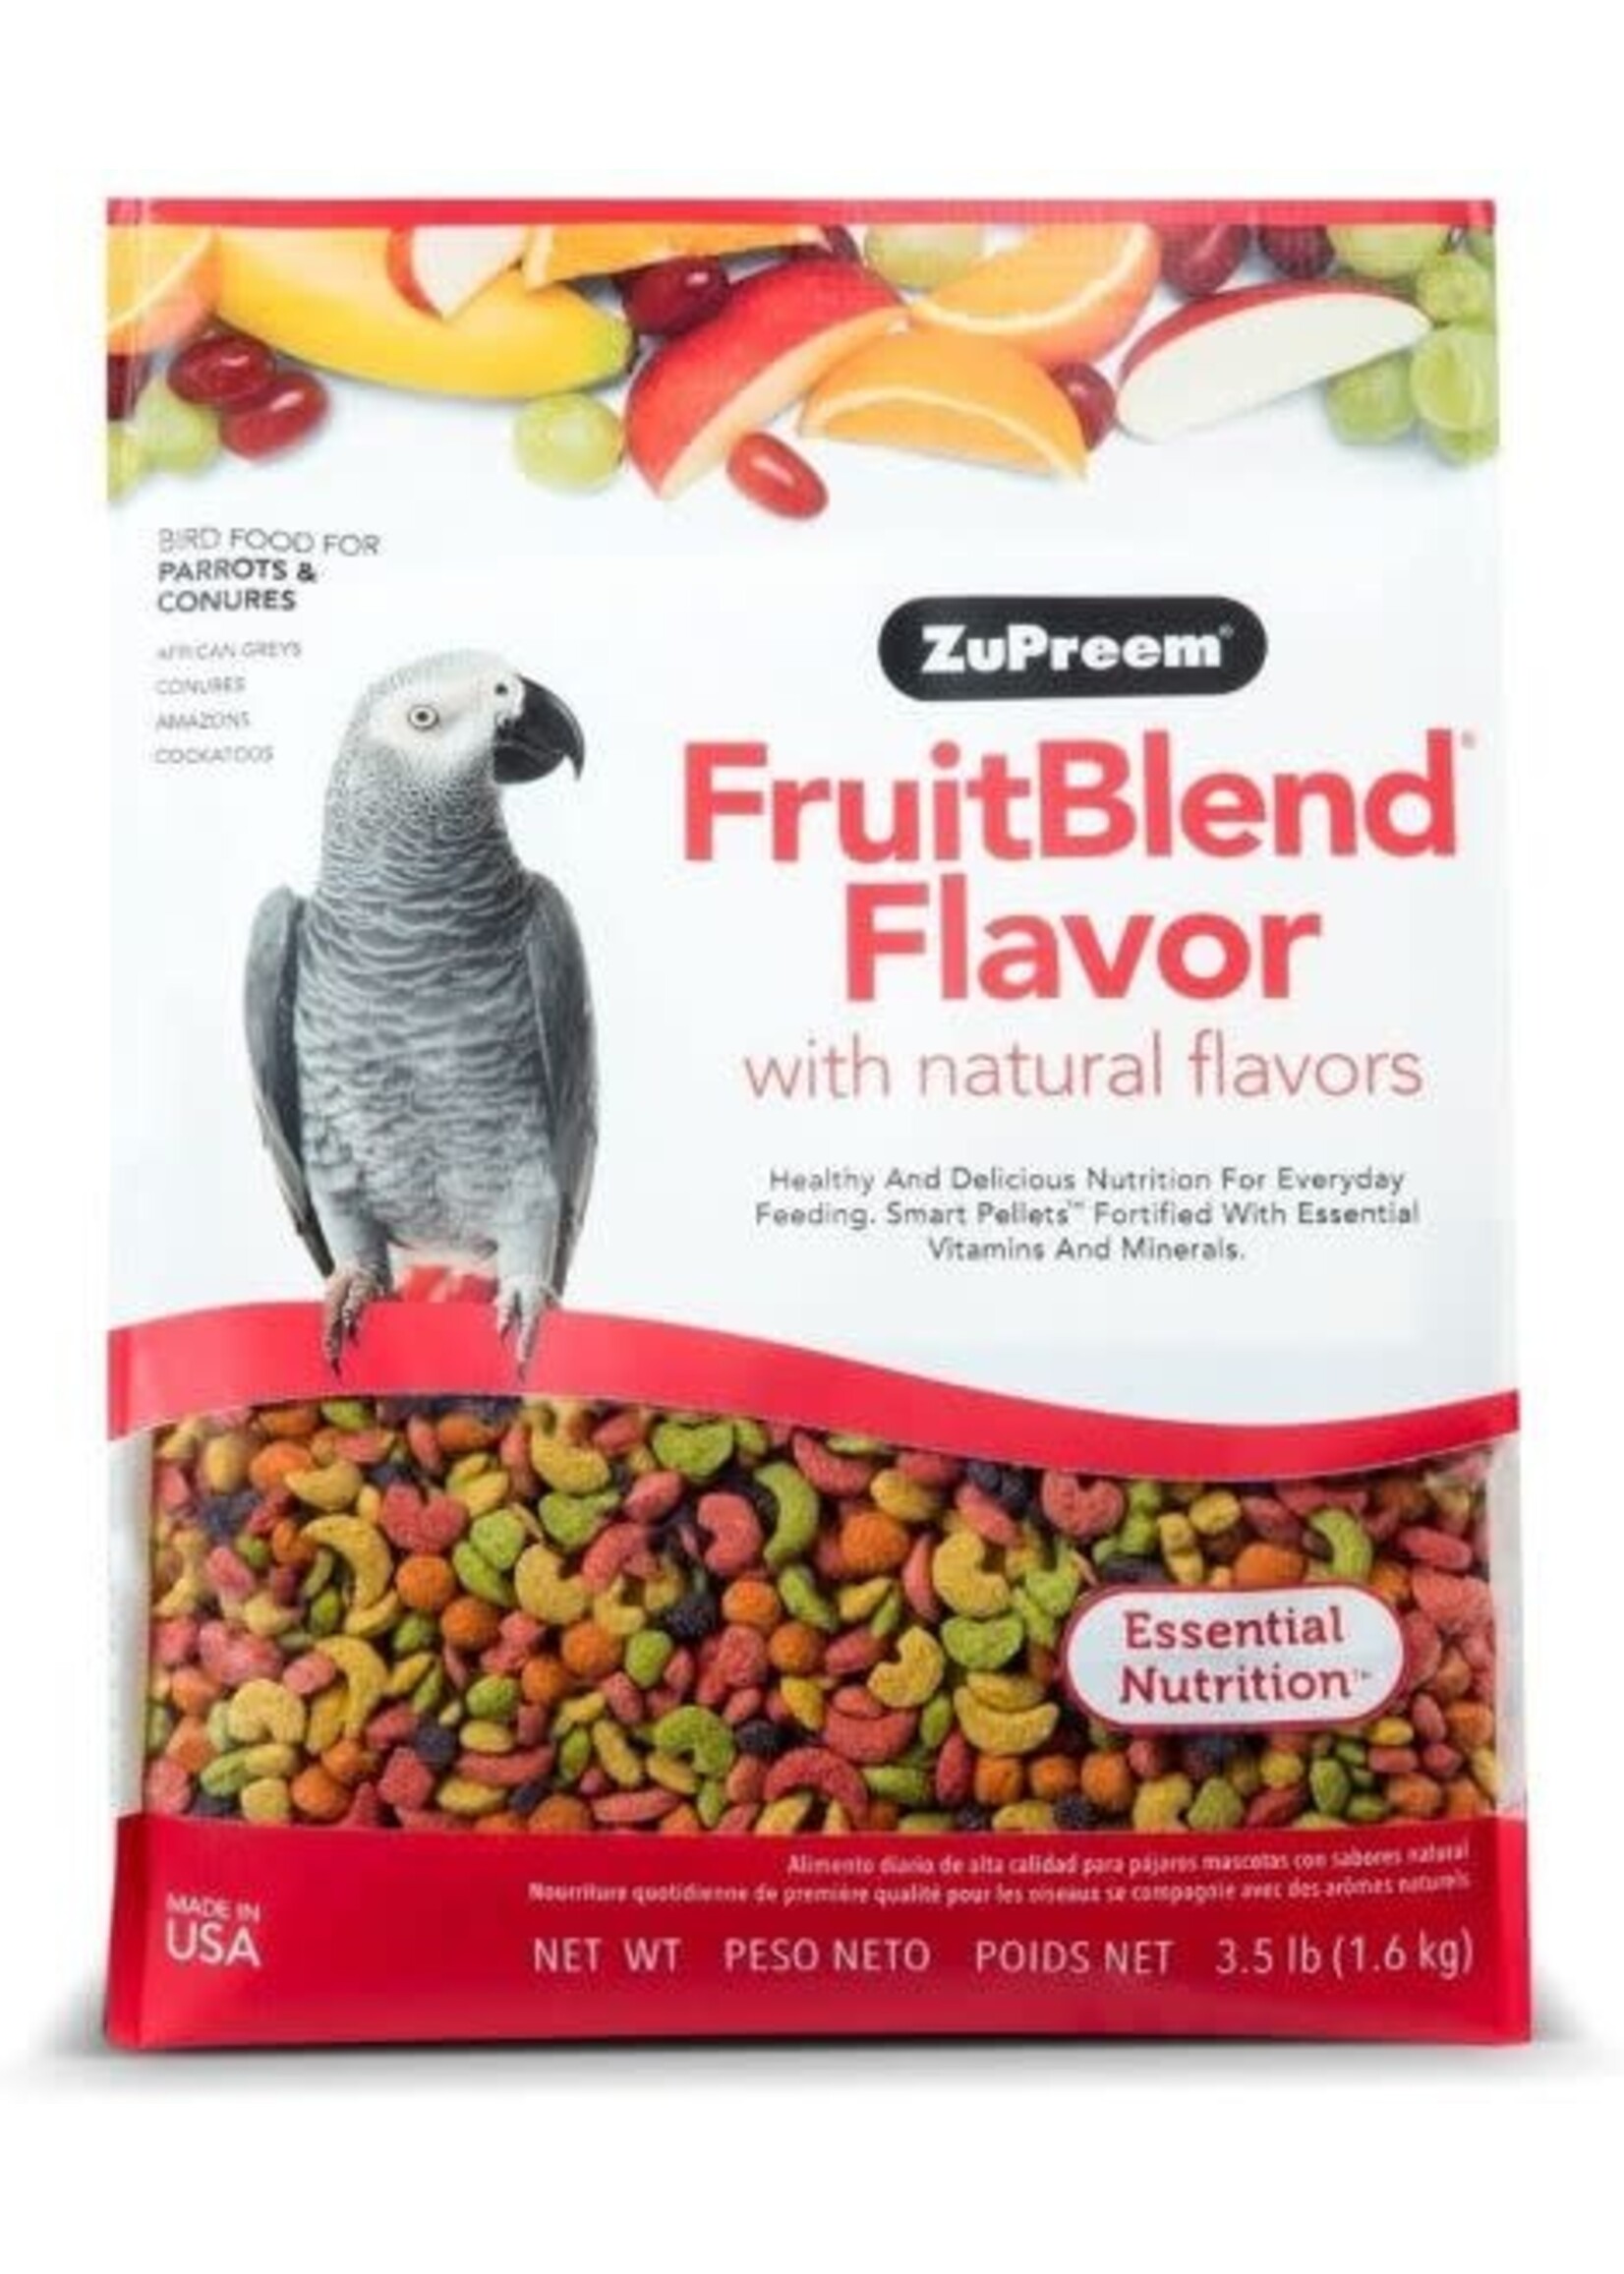 Zupreem ZuPreem "Fruitblend" Food For Conure, Small Cockatoos & Other Medium To Large Parrot 3.5lbs 30830